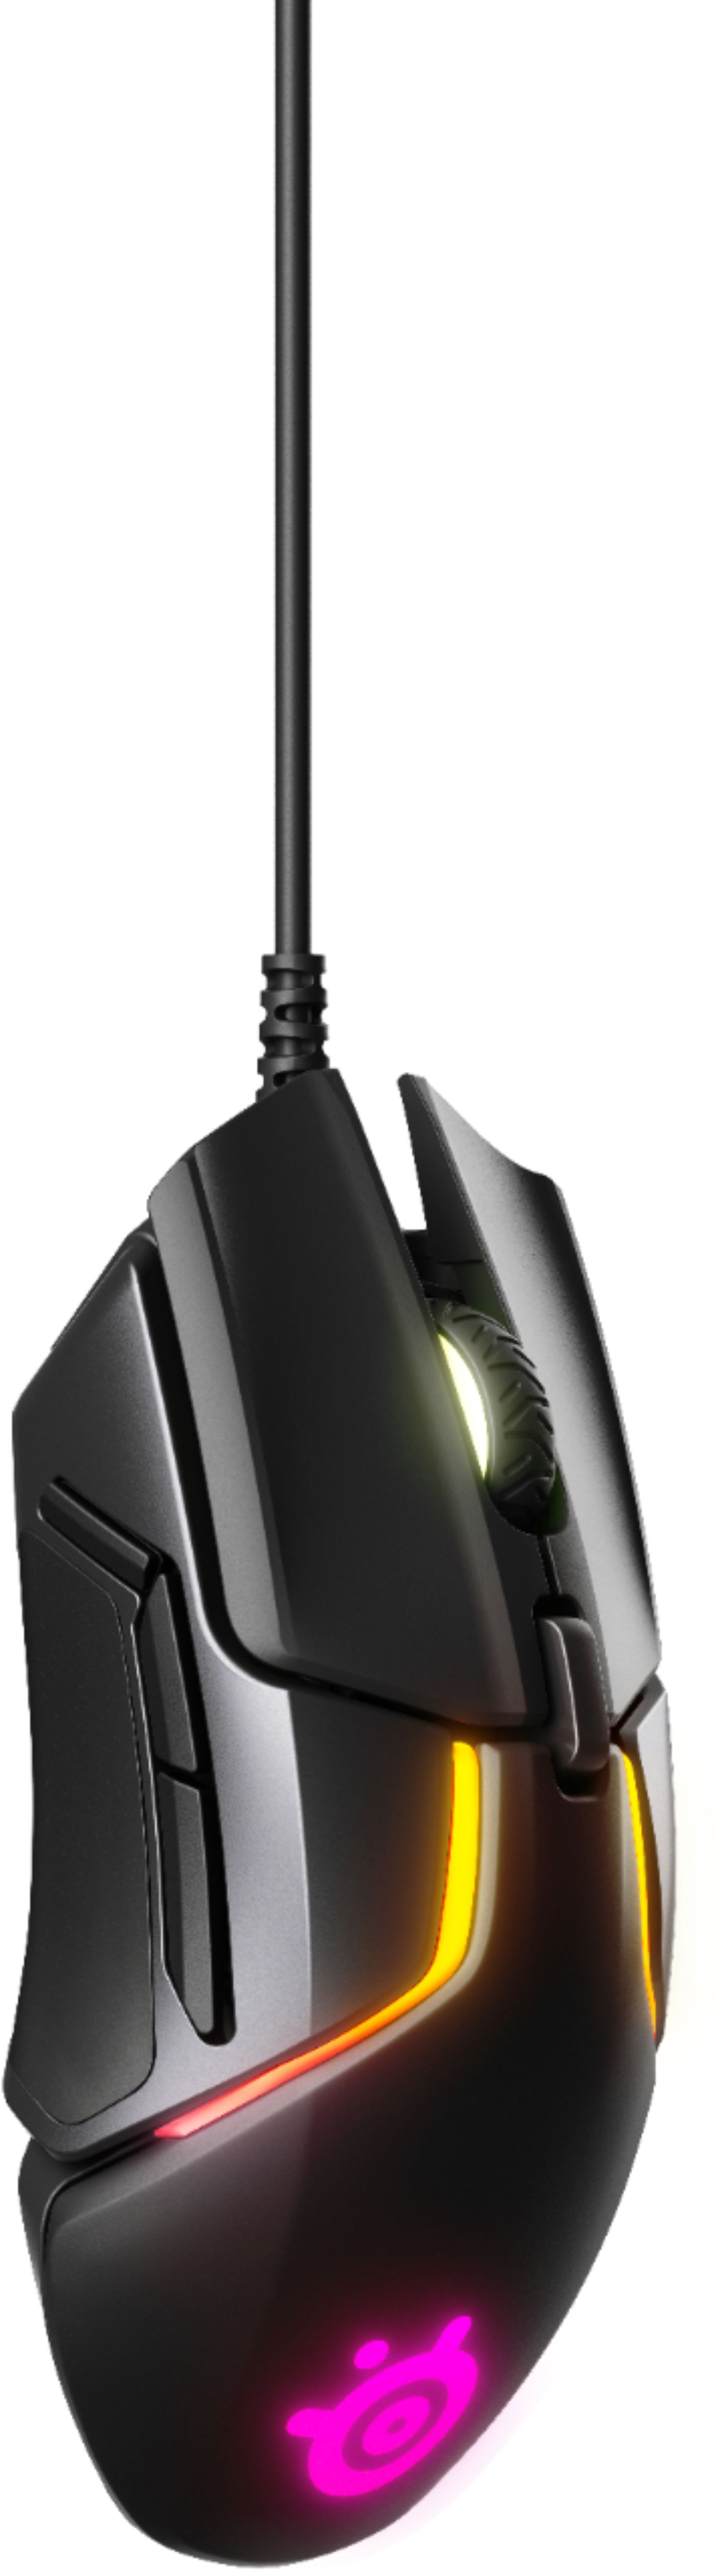 Angle View: SteelSeries - Rival 650 Wireless Optical Gaming Mouse with RGB Lighting - Black